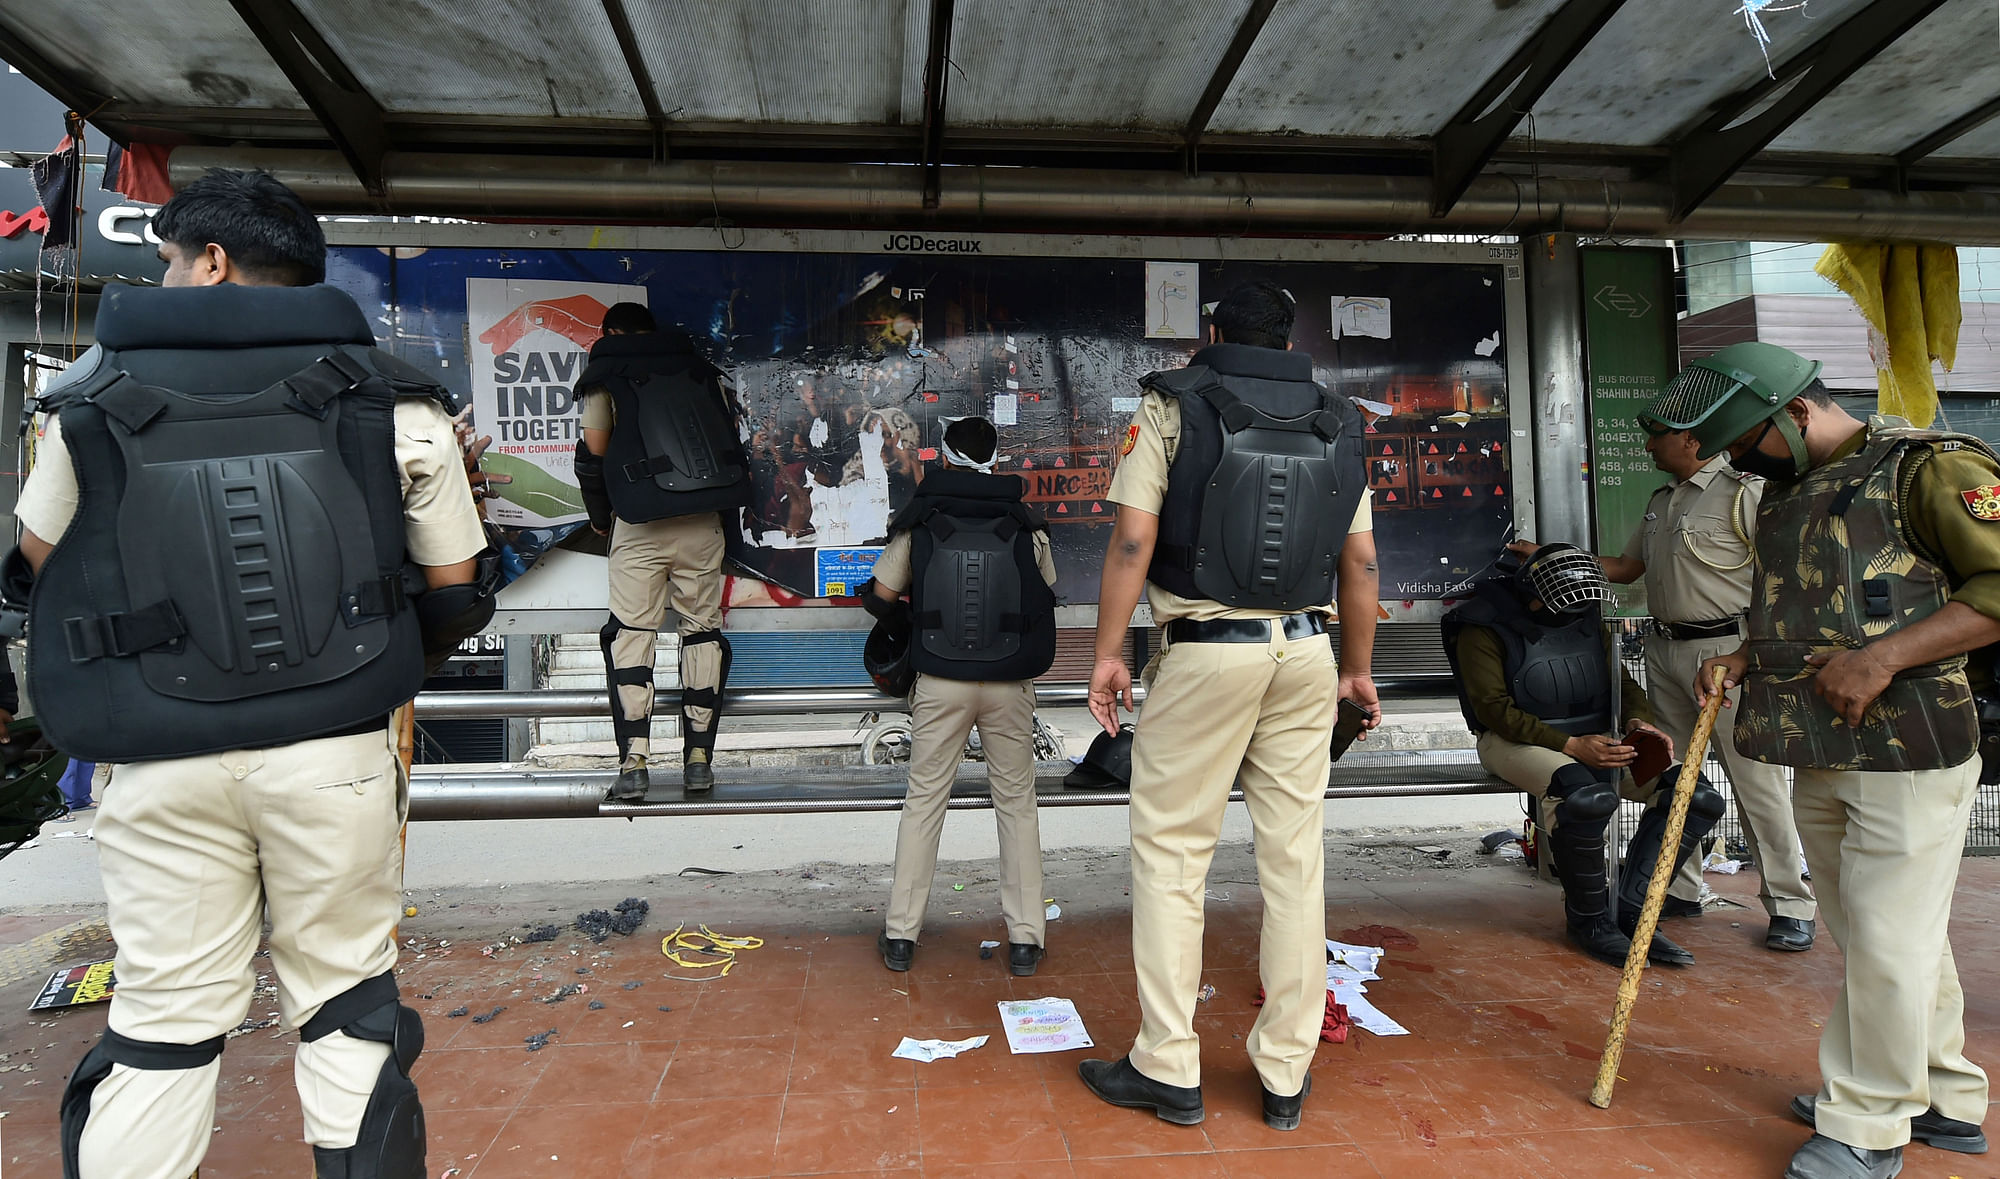 Delhi Police personnel remove posters at Shaheen Bagh protest site.